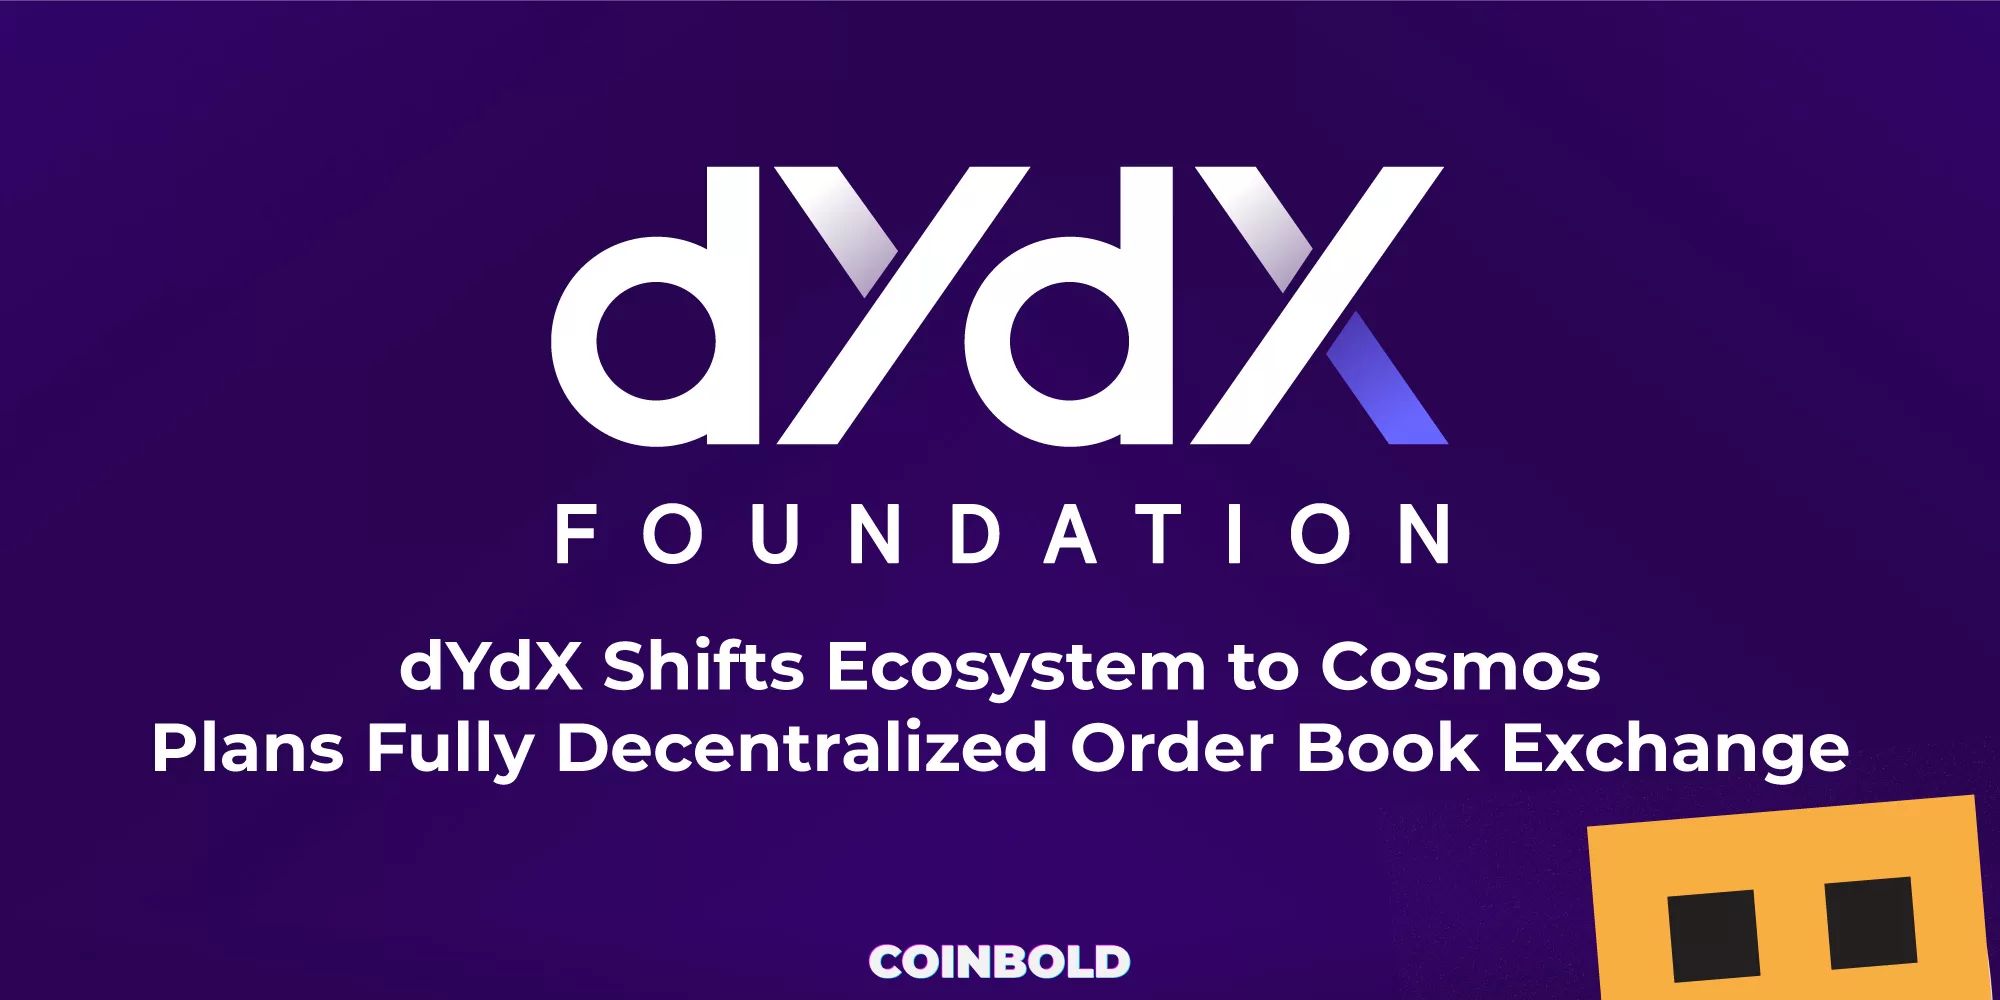 dYdX Shifts Ecosystem to Cosmos, Plans Fully Decentralized Order Book Exchange